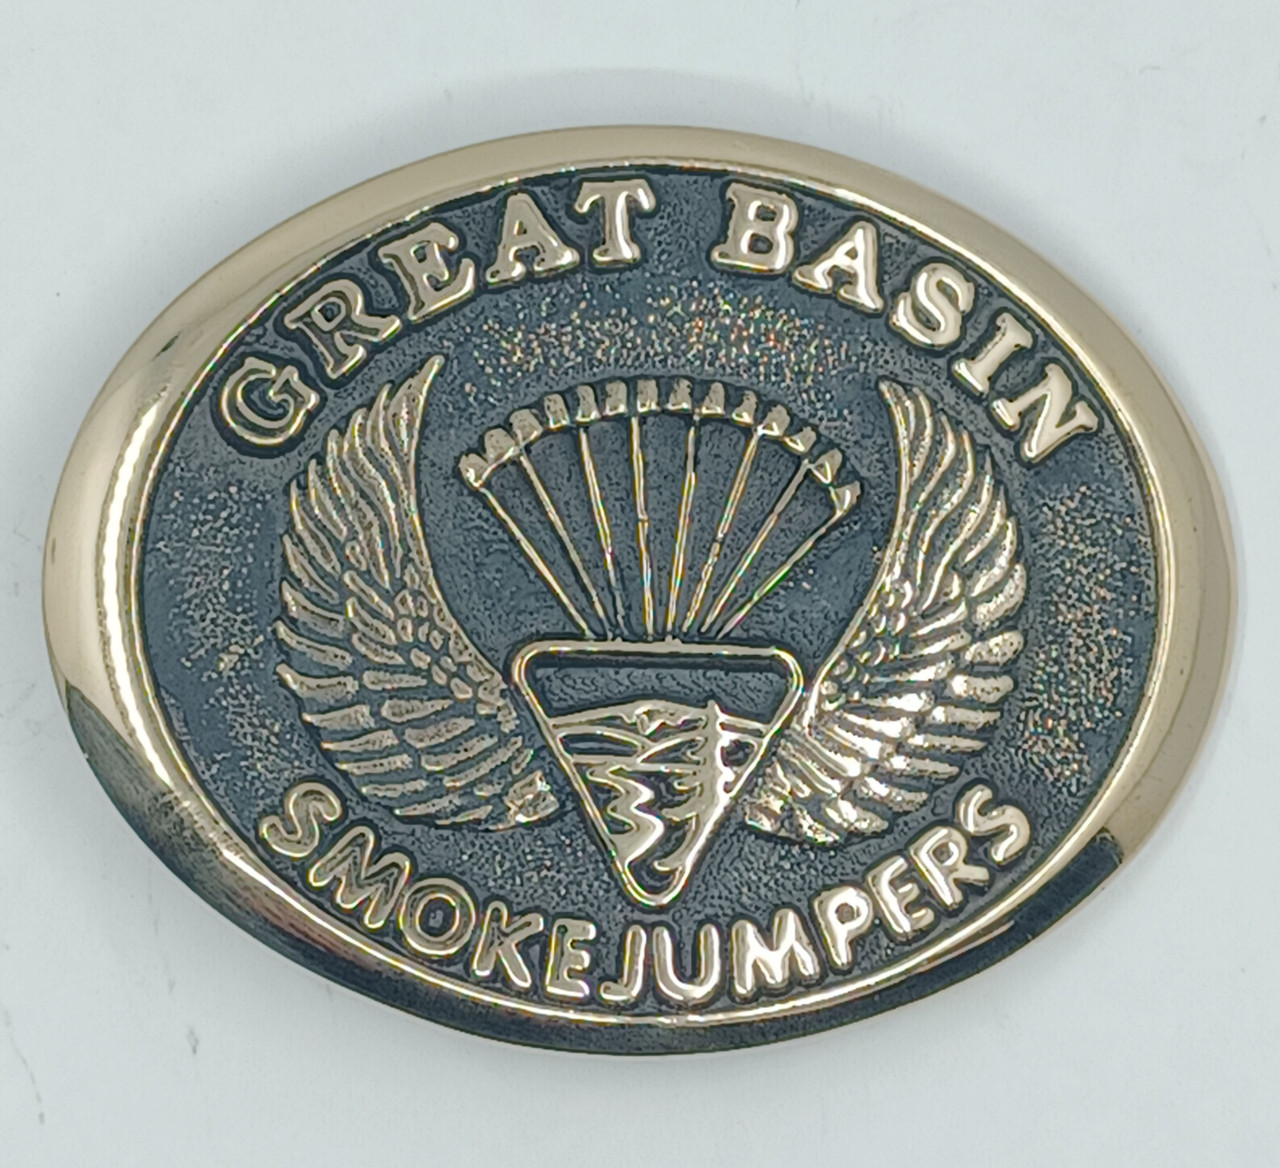 Great Basin Smokejumpers Buckle (RESTRICTED)